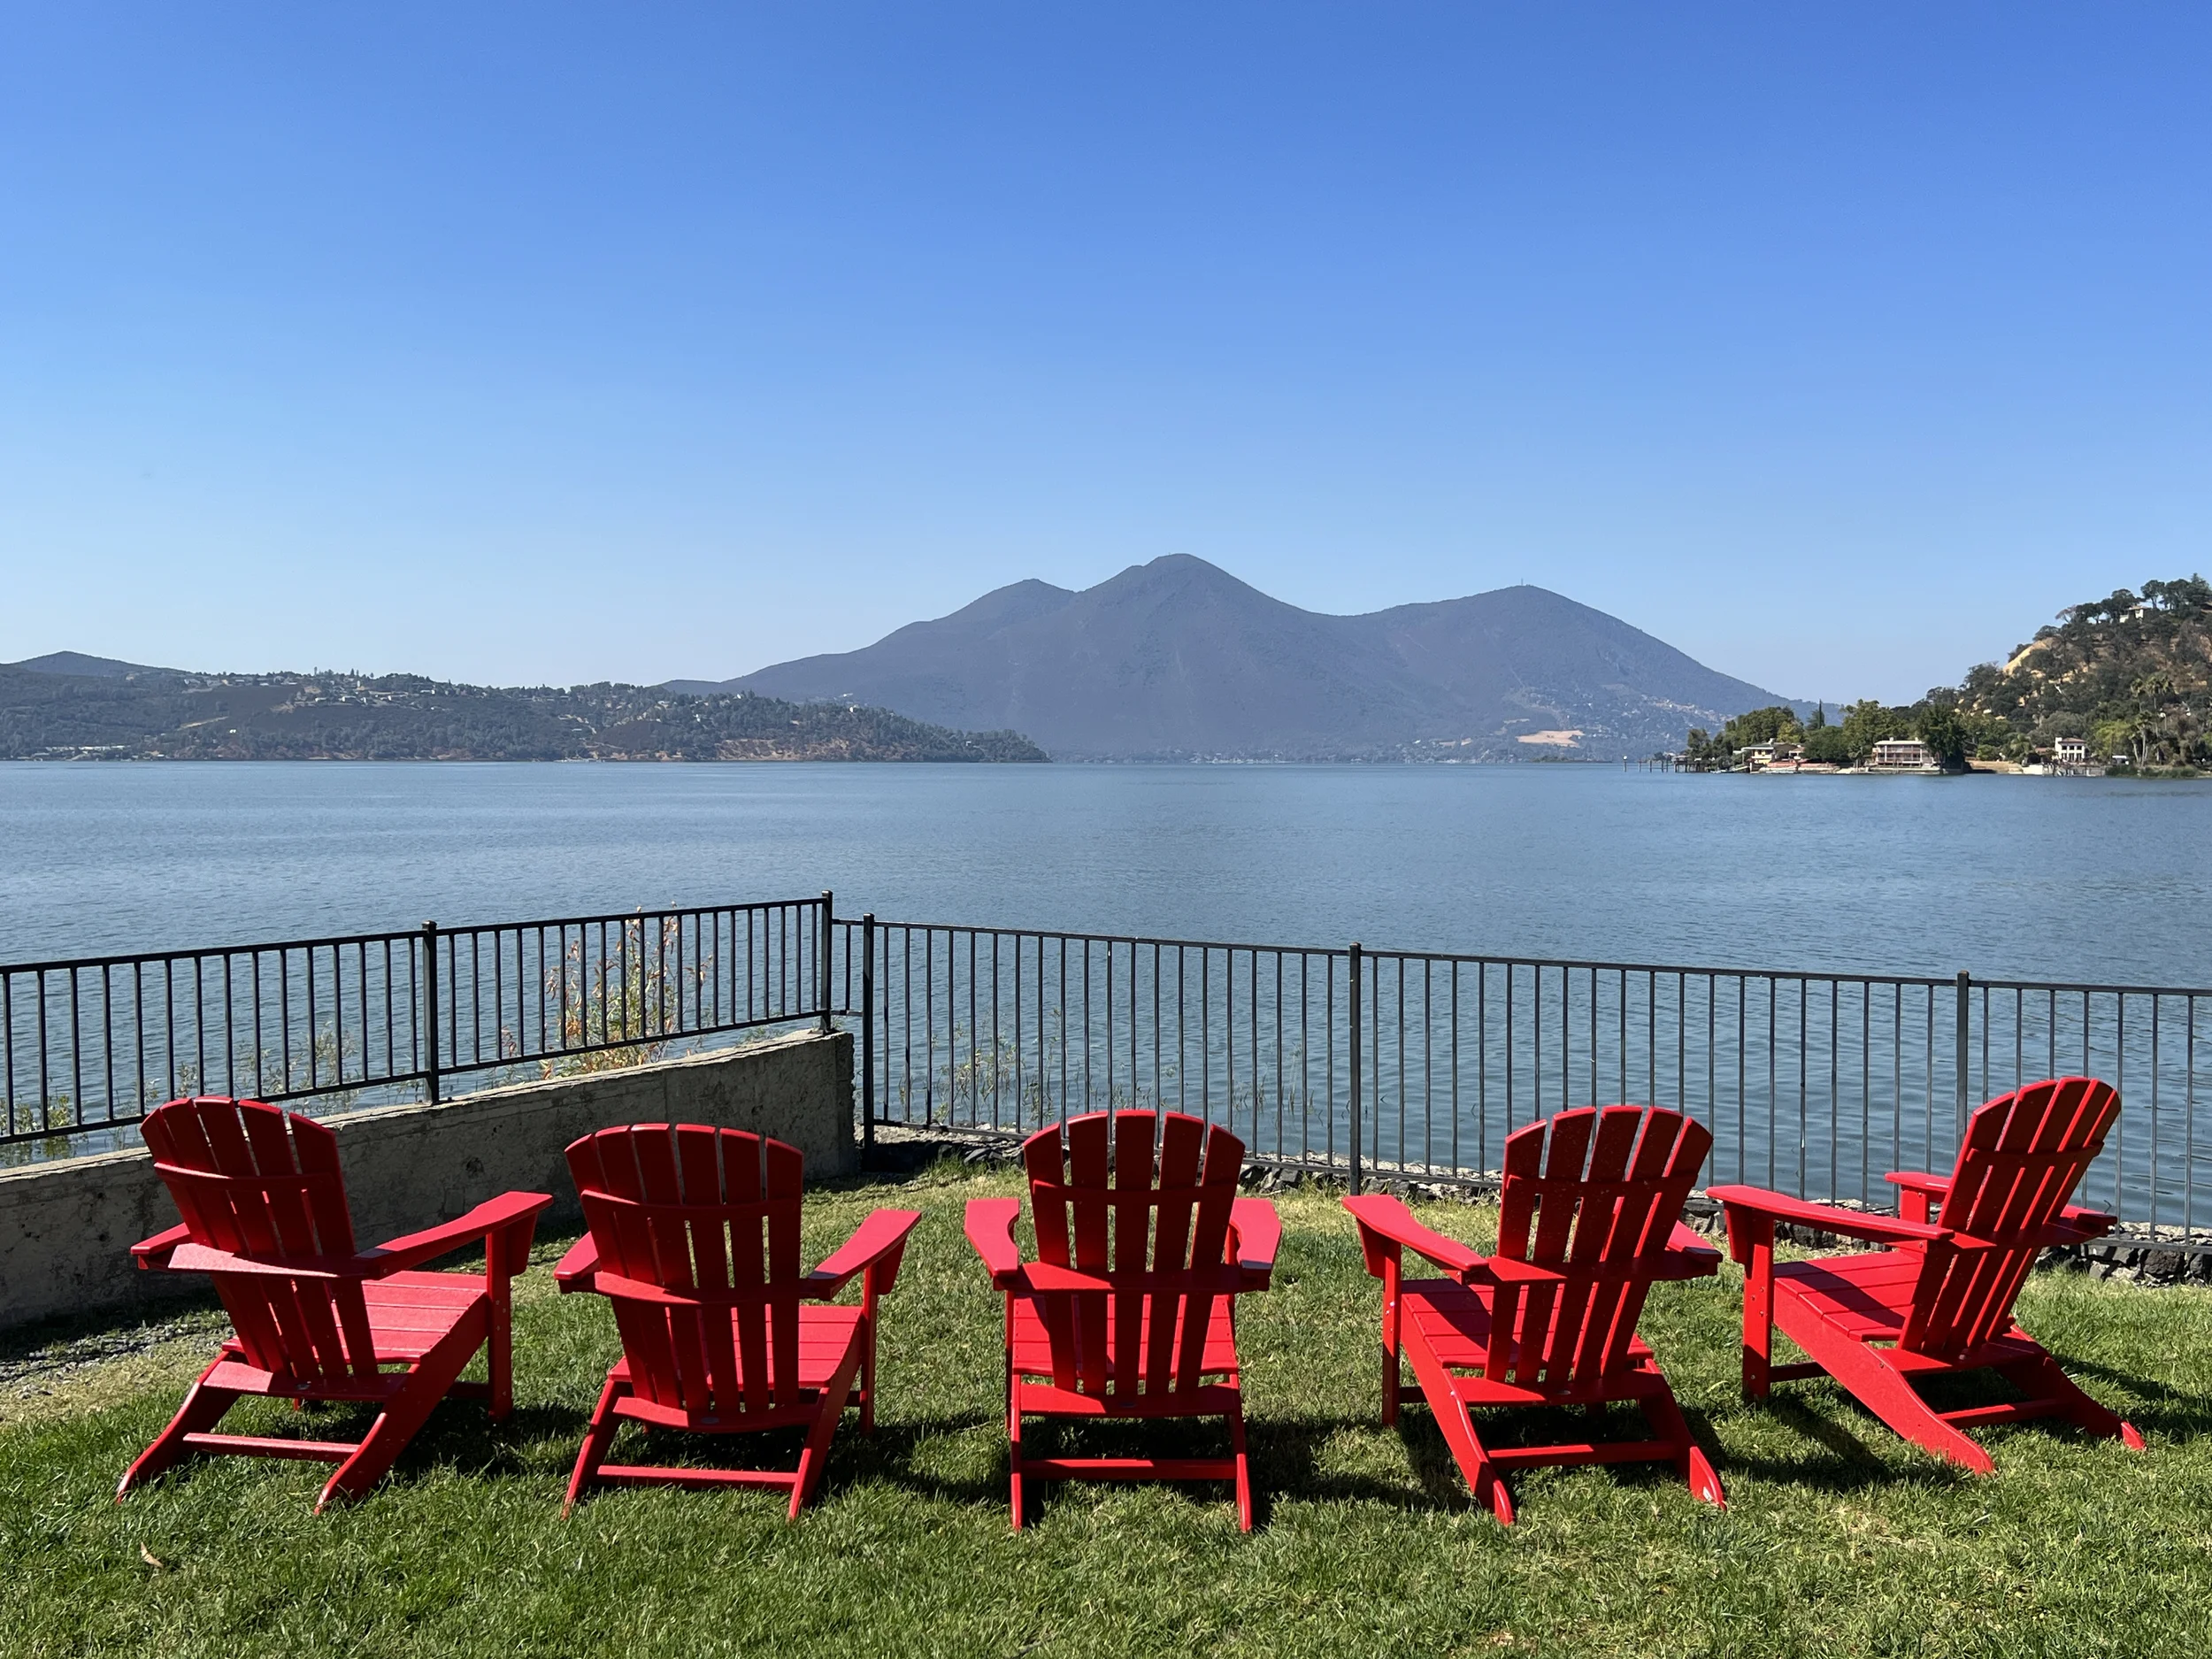 Guests can relax and enjoy the peaceful lake, winery and sunset views in our Adirondack chairs